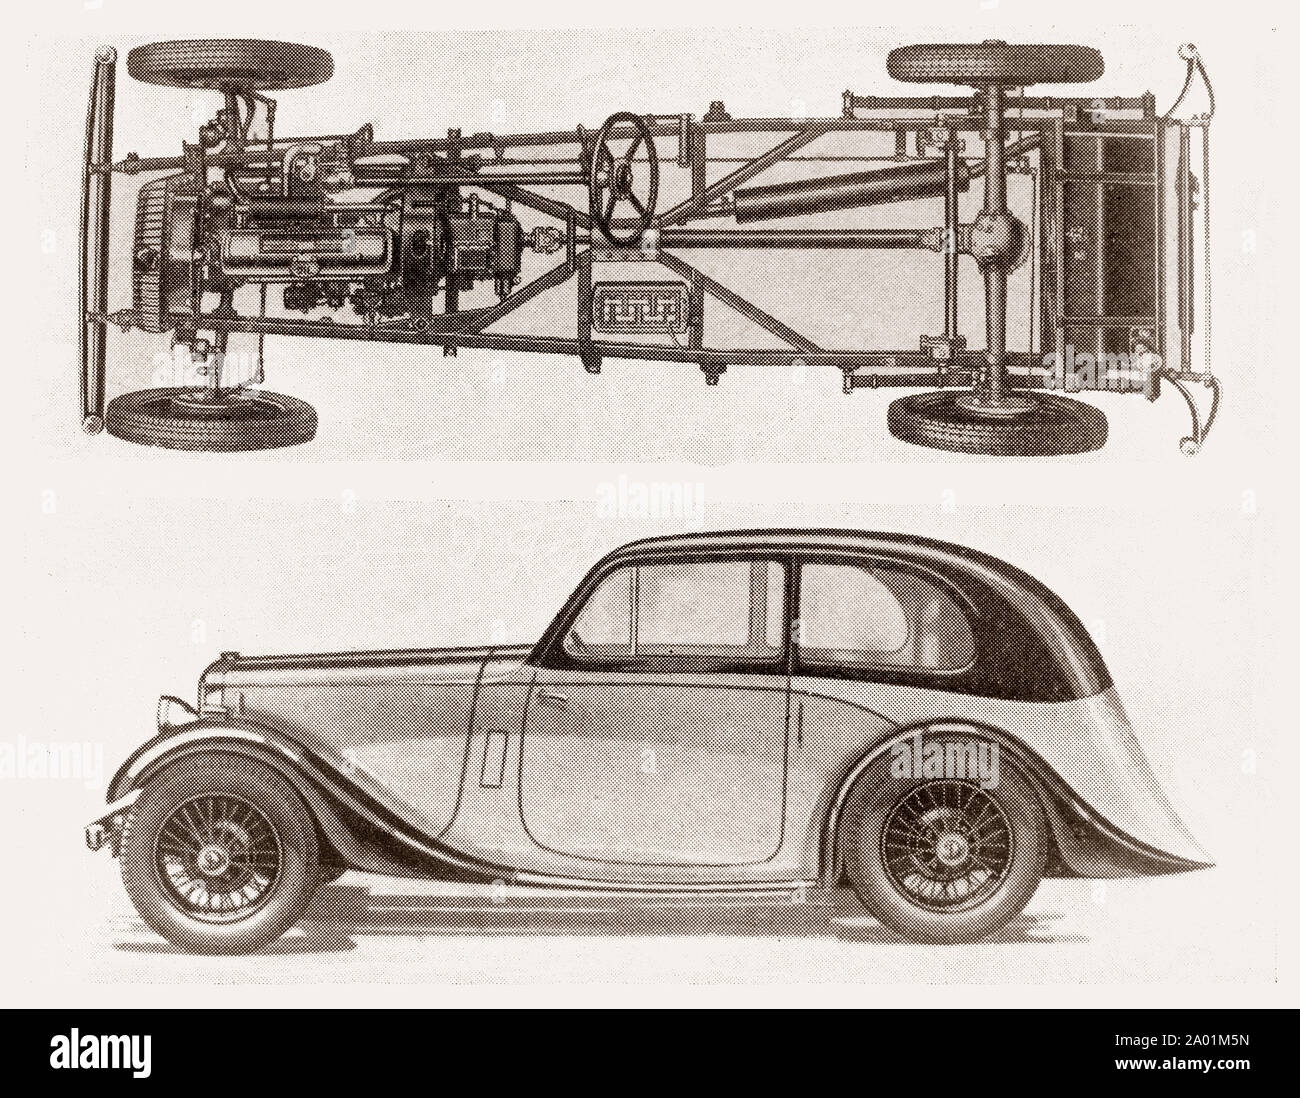 The latest engineering and technology from the 1930s:  A Daimler car  and chassis. Stock Photo